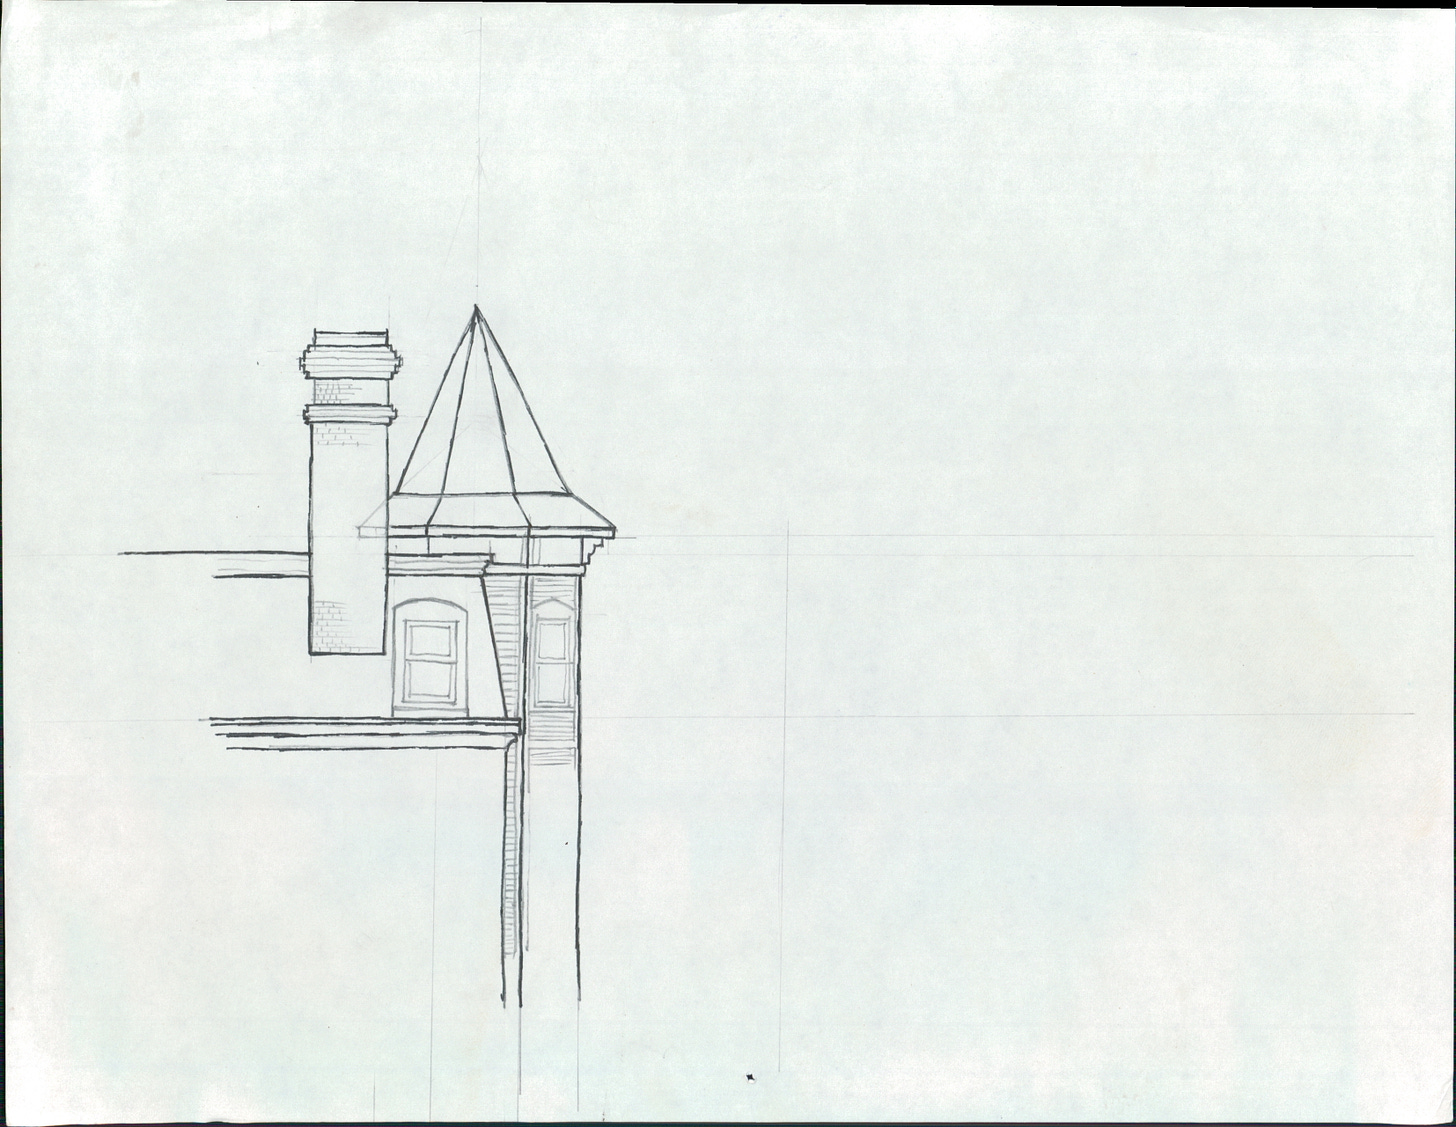 Line drawing of roof line of house with tower and windows. Perspective is from the side.